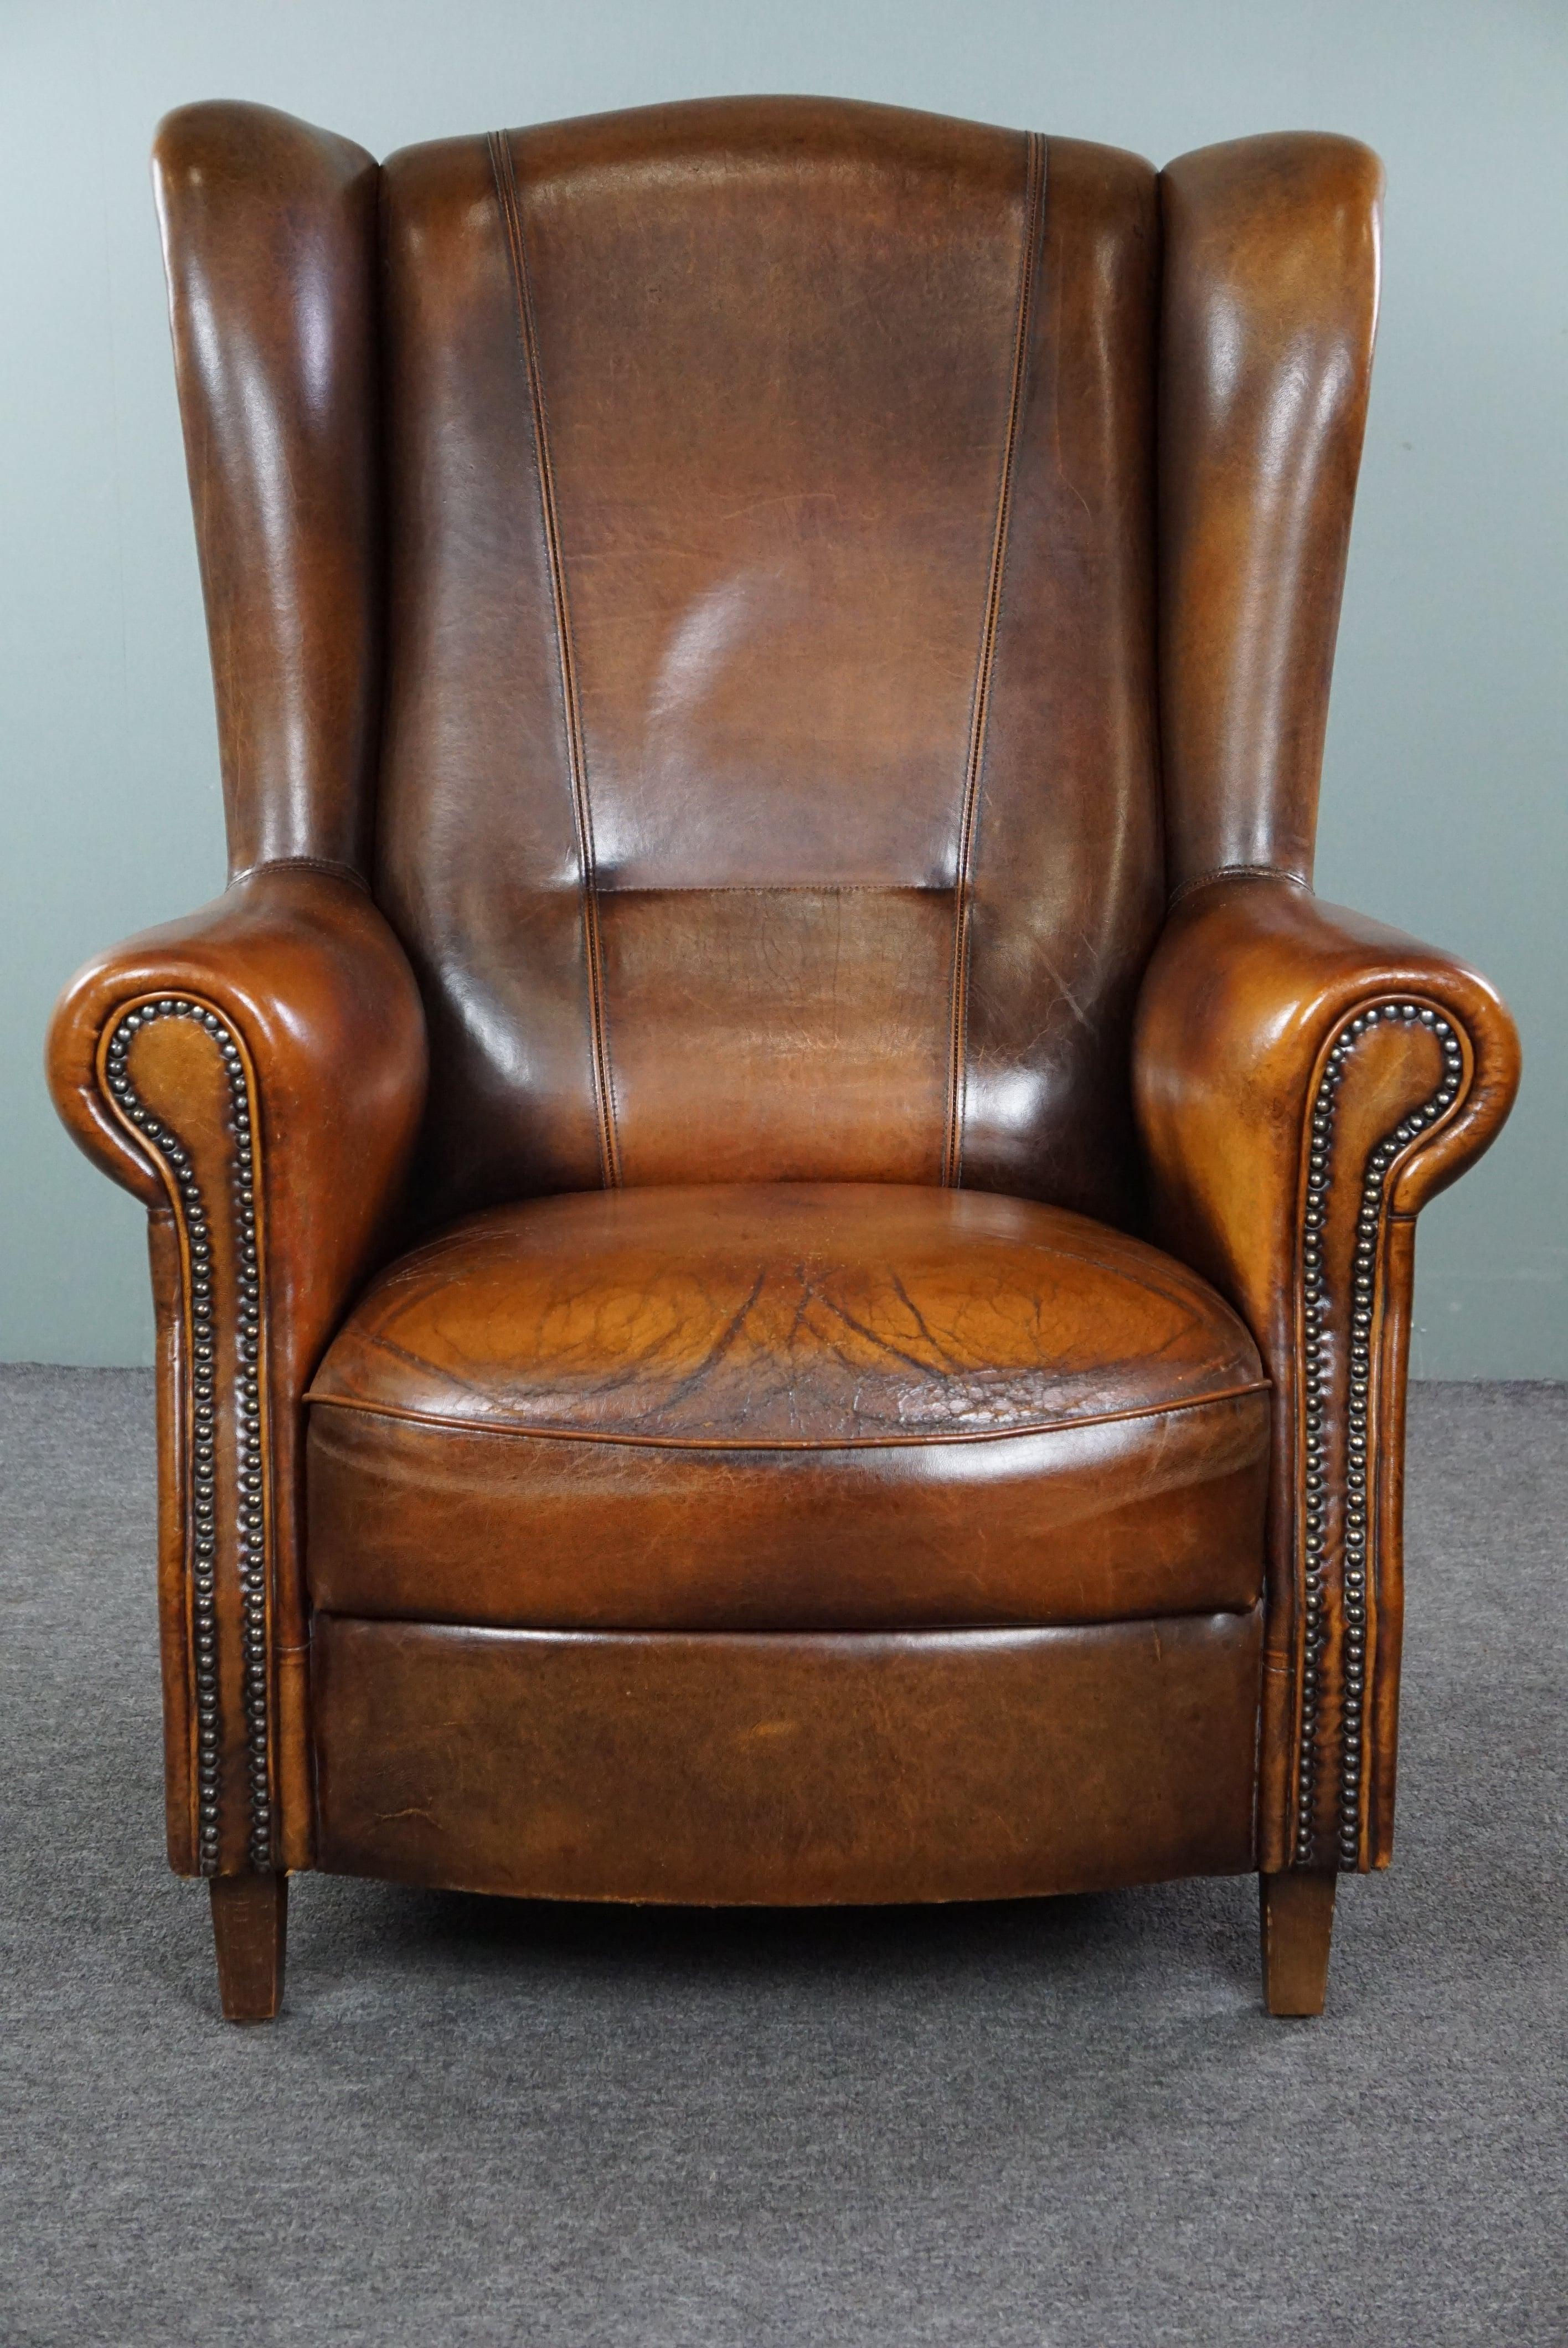 Offered is this lovely sheepskin wingback chair with character and proper seating. Discover the unique charm of this characteristic wingback chair crafted in high-quality sheepskin leather. This chair not only exudes style but also tells a story